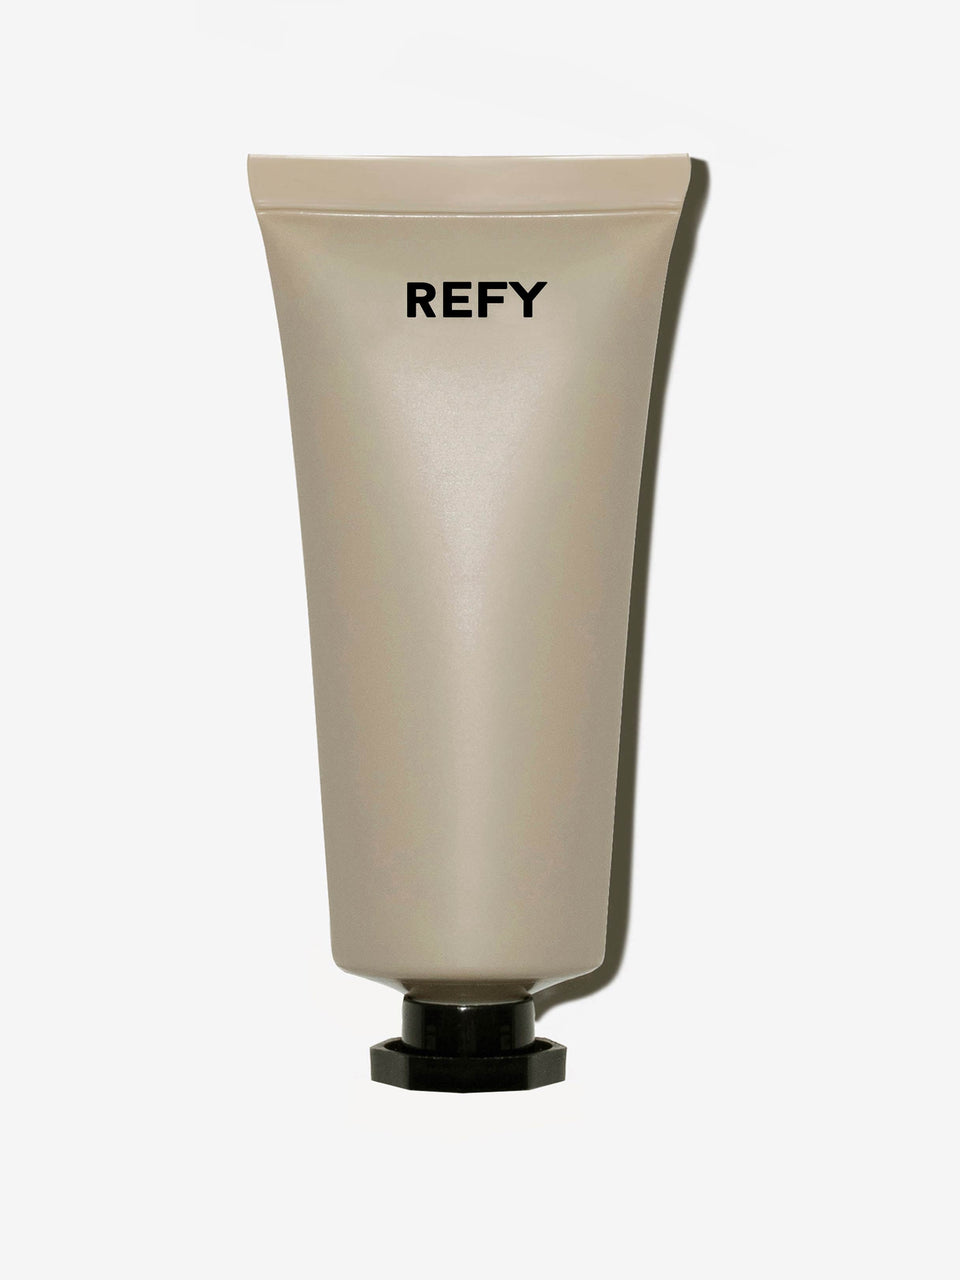 FRONT IMAGE OF REFY BODY GLOW